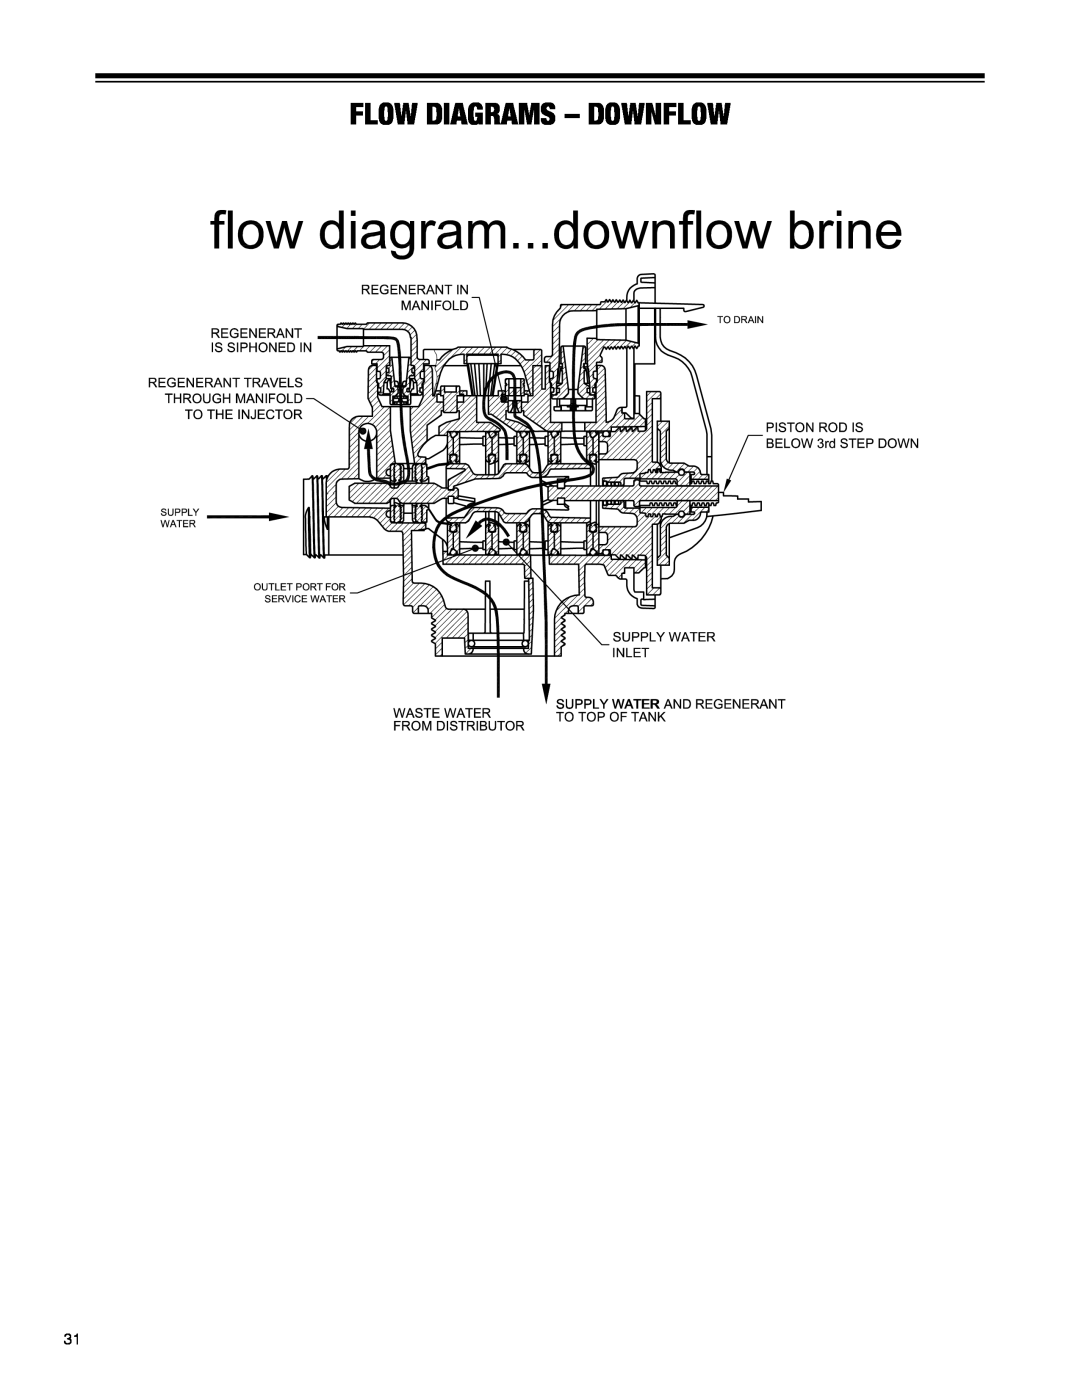 Argosy Research H-125 Series owner manual Flow Diagrams - Downflow 